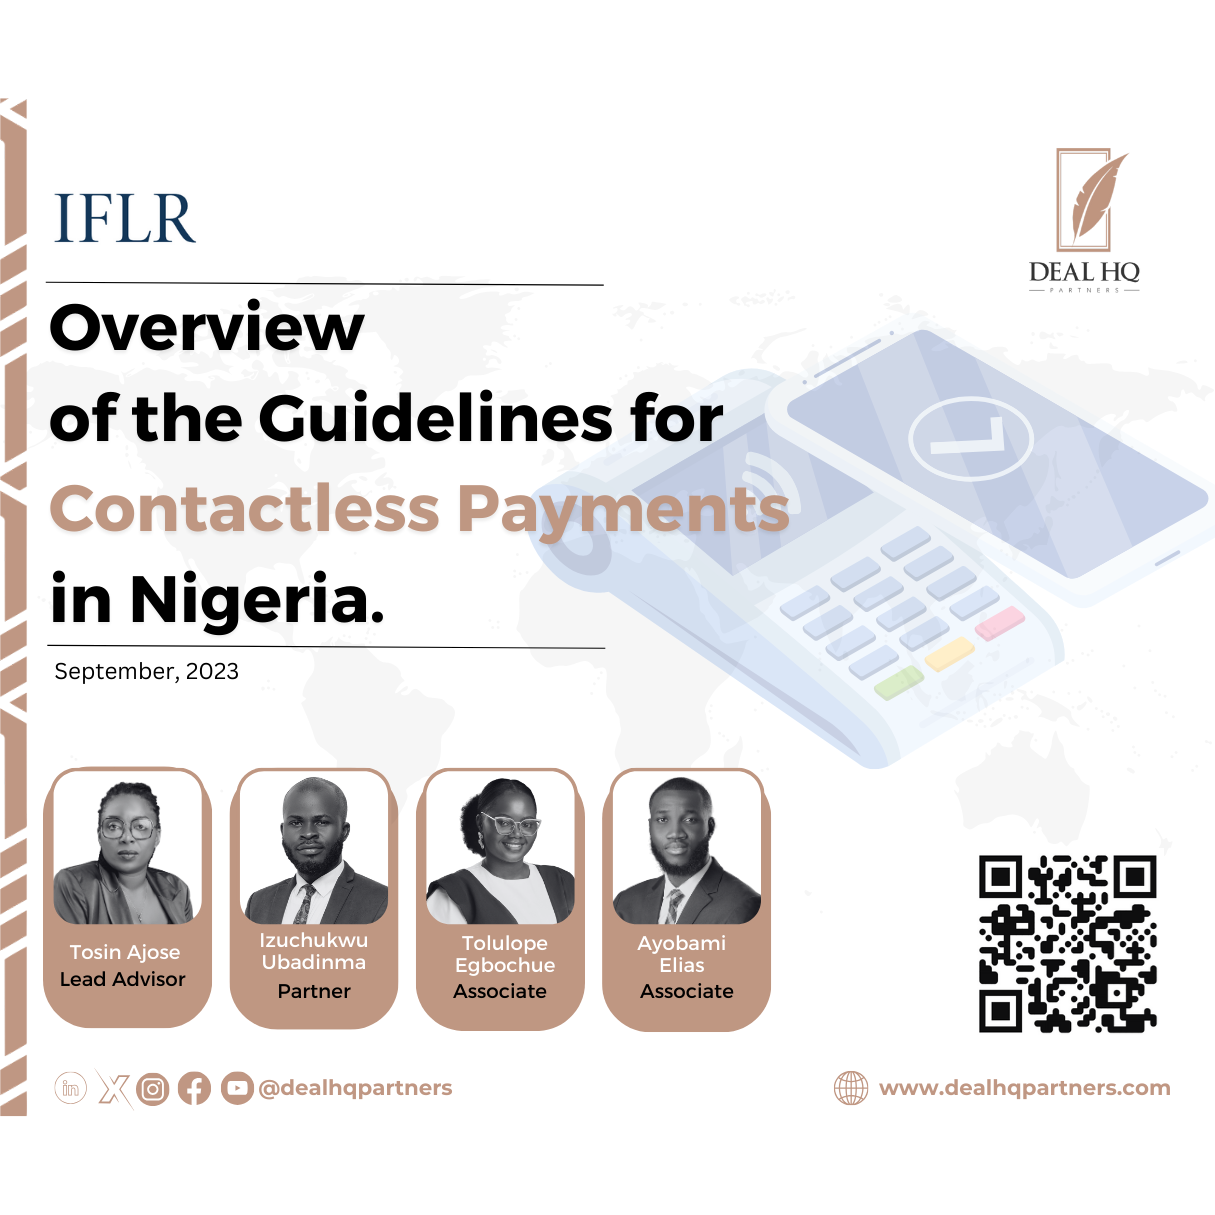 Overview of the Guidelines for Contactless Payments in Nigeria